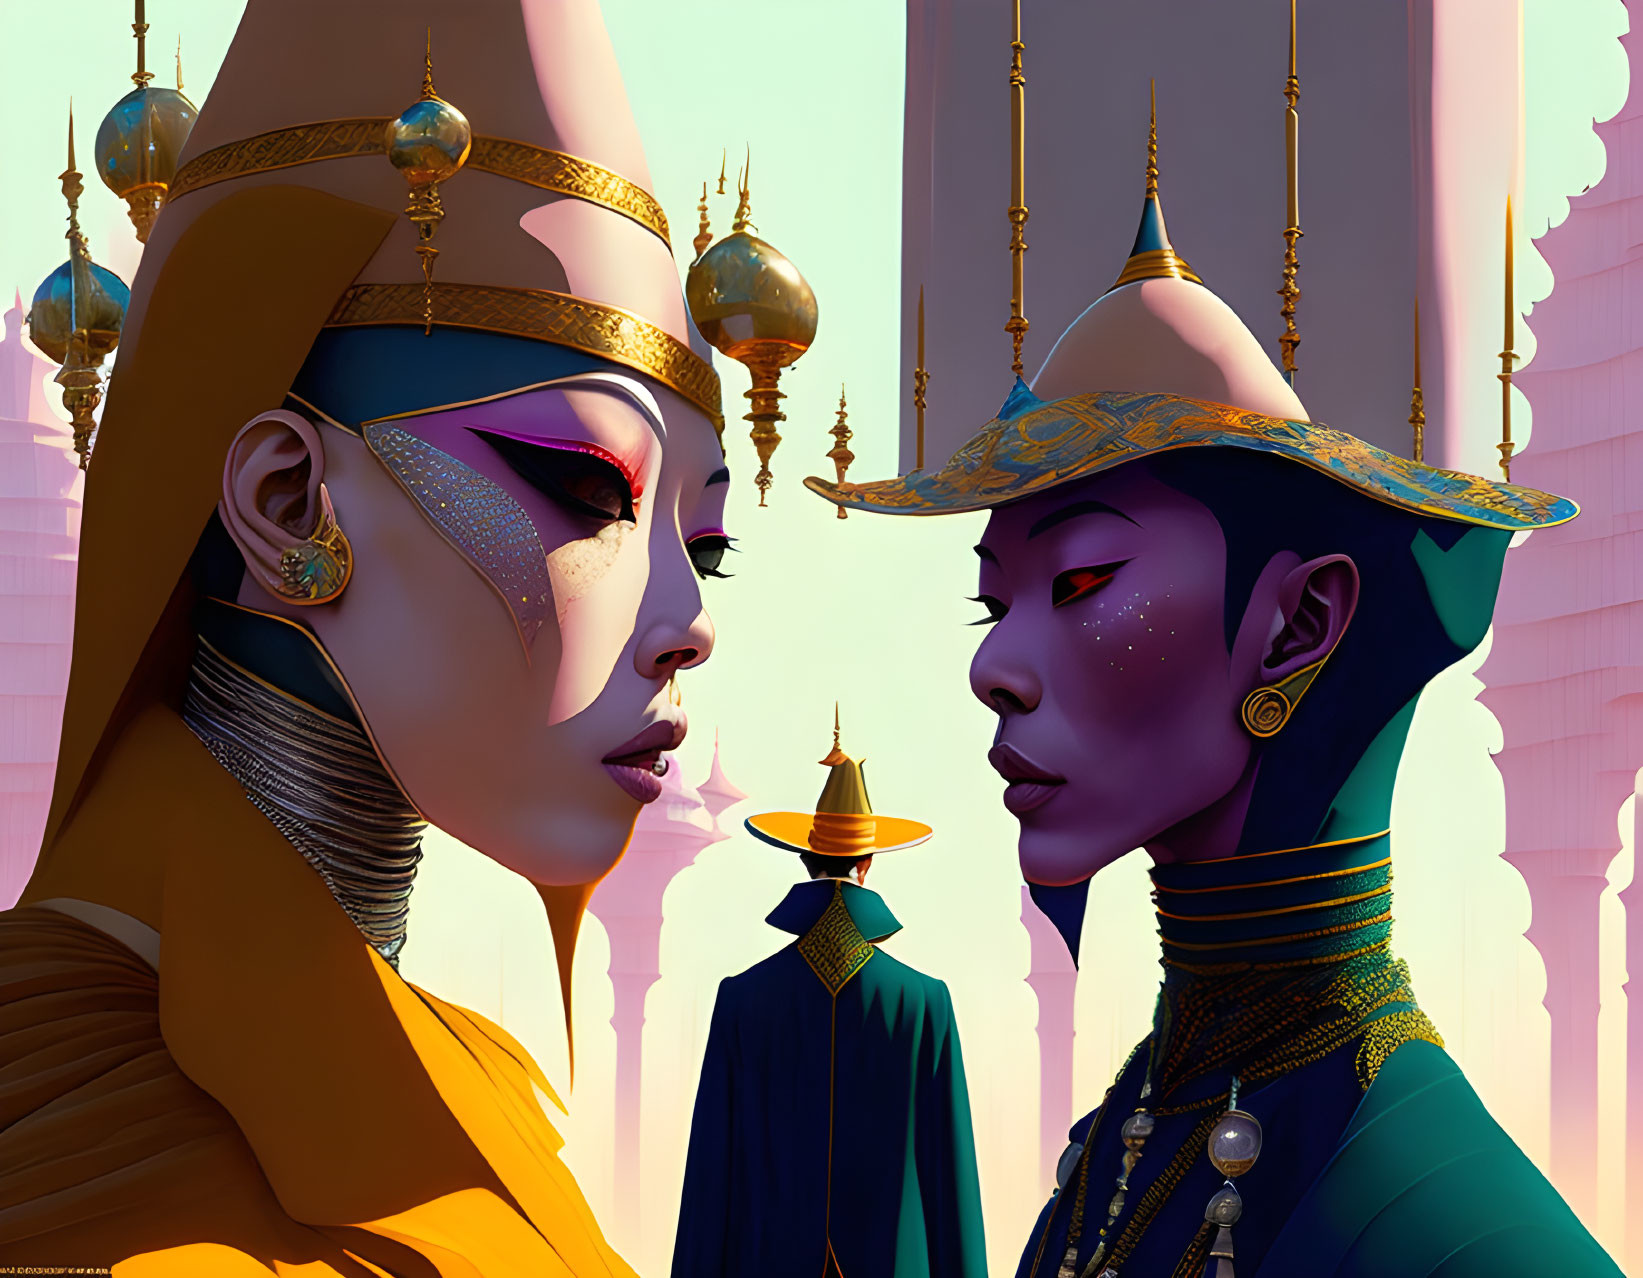 Stylized characters in regal attire with intricate makeup in front of pink-hued architecture